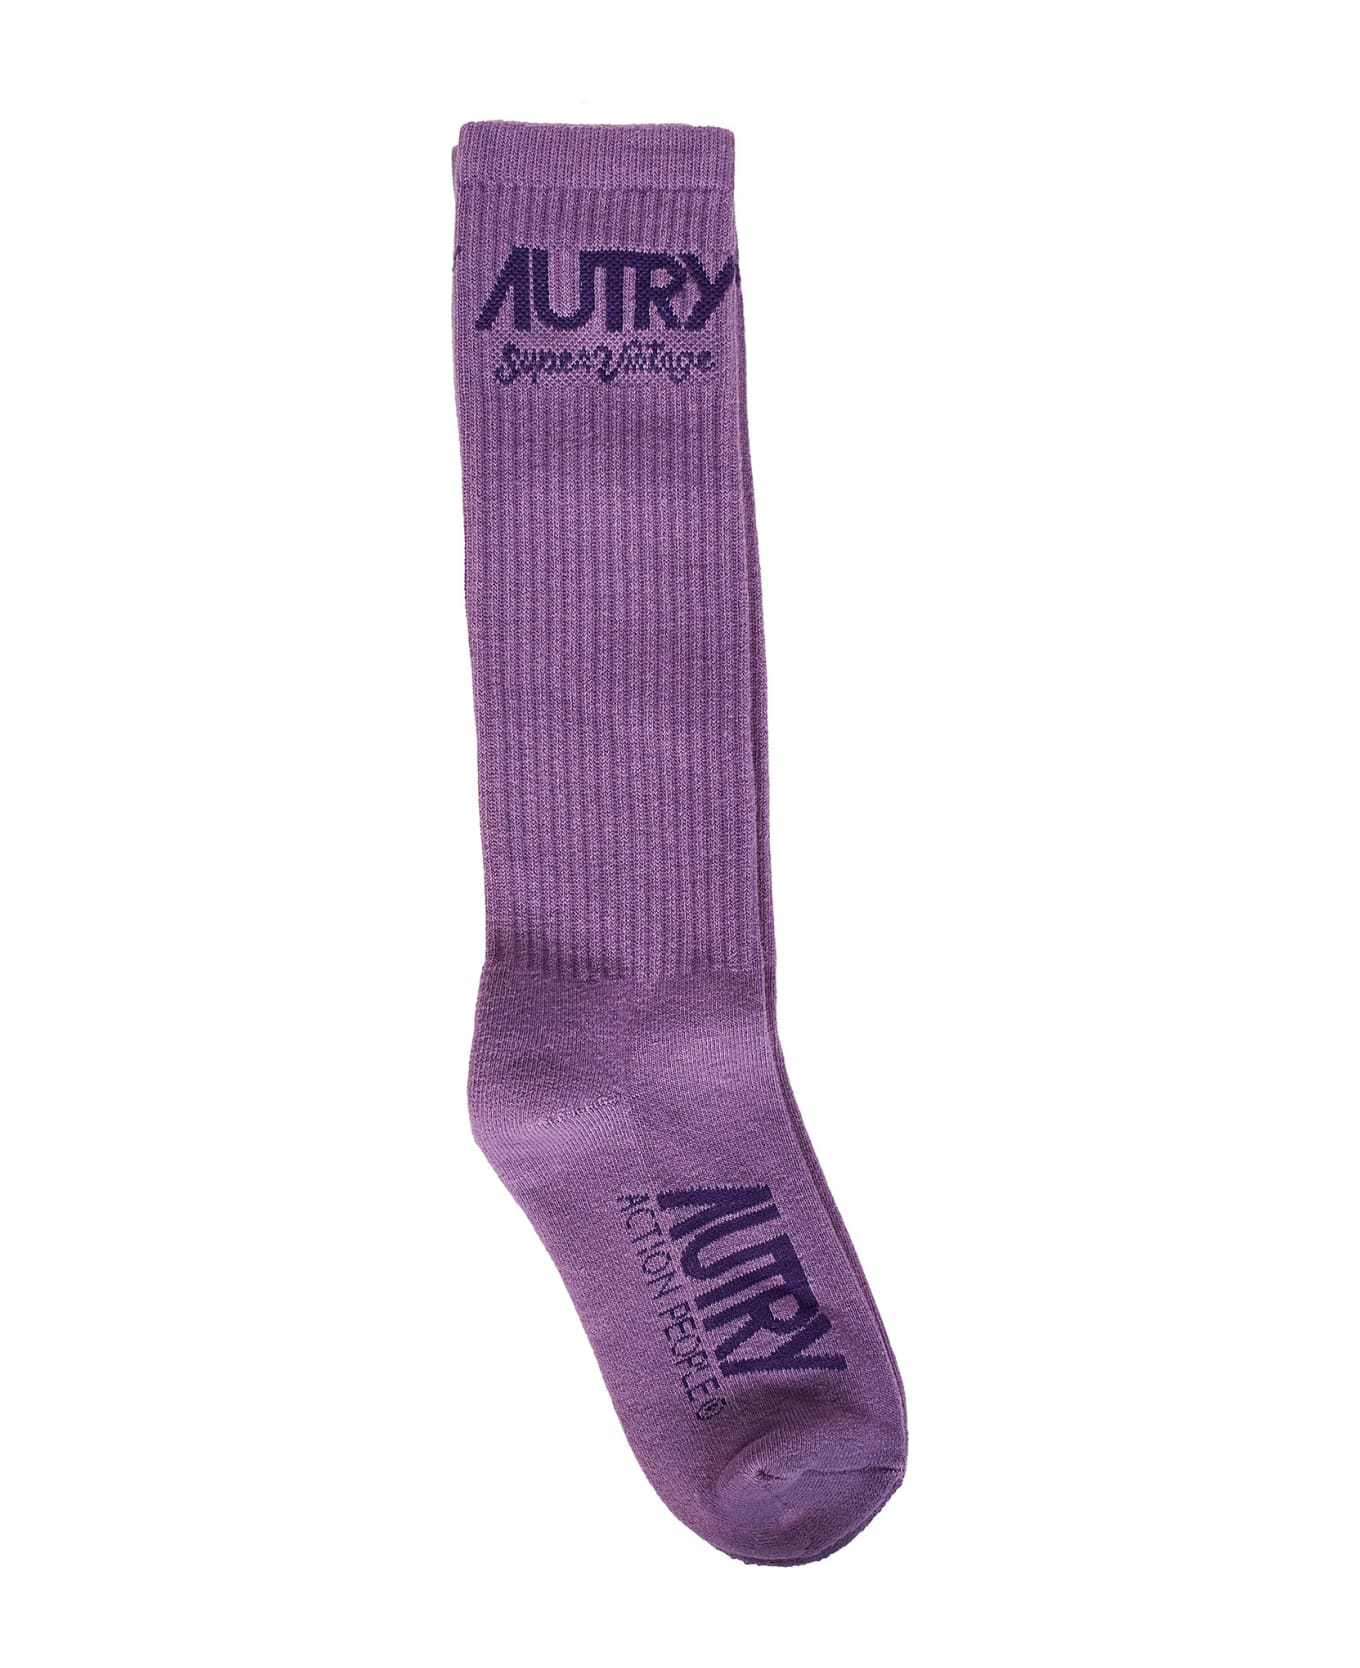 Autry Supervintage Socks - Tinto Lilac 靴下＆タイツ